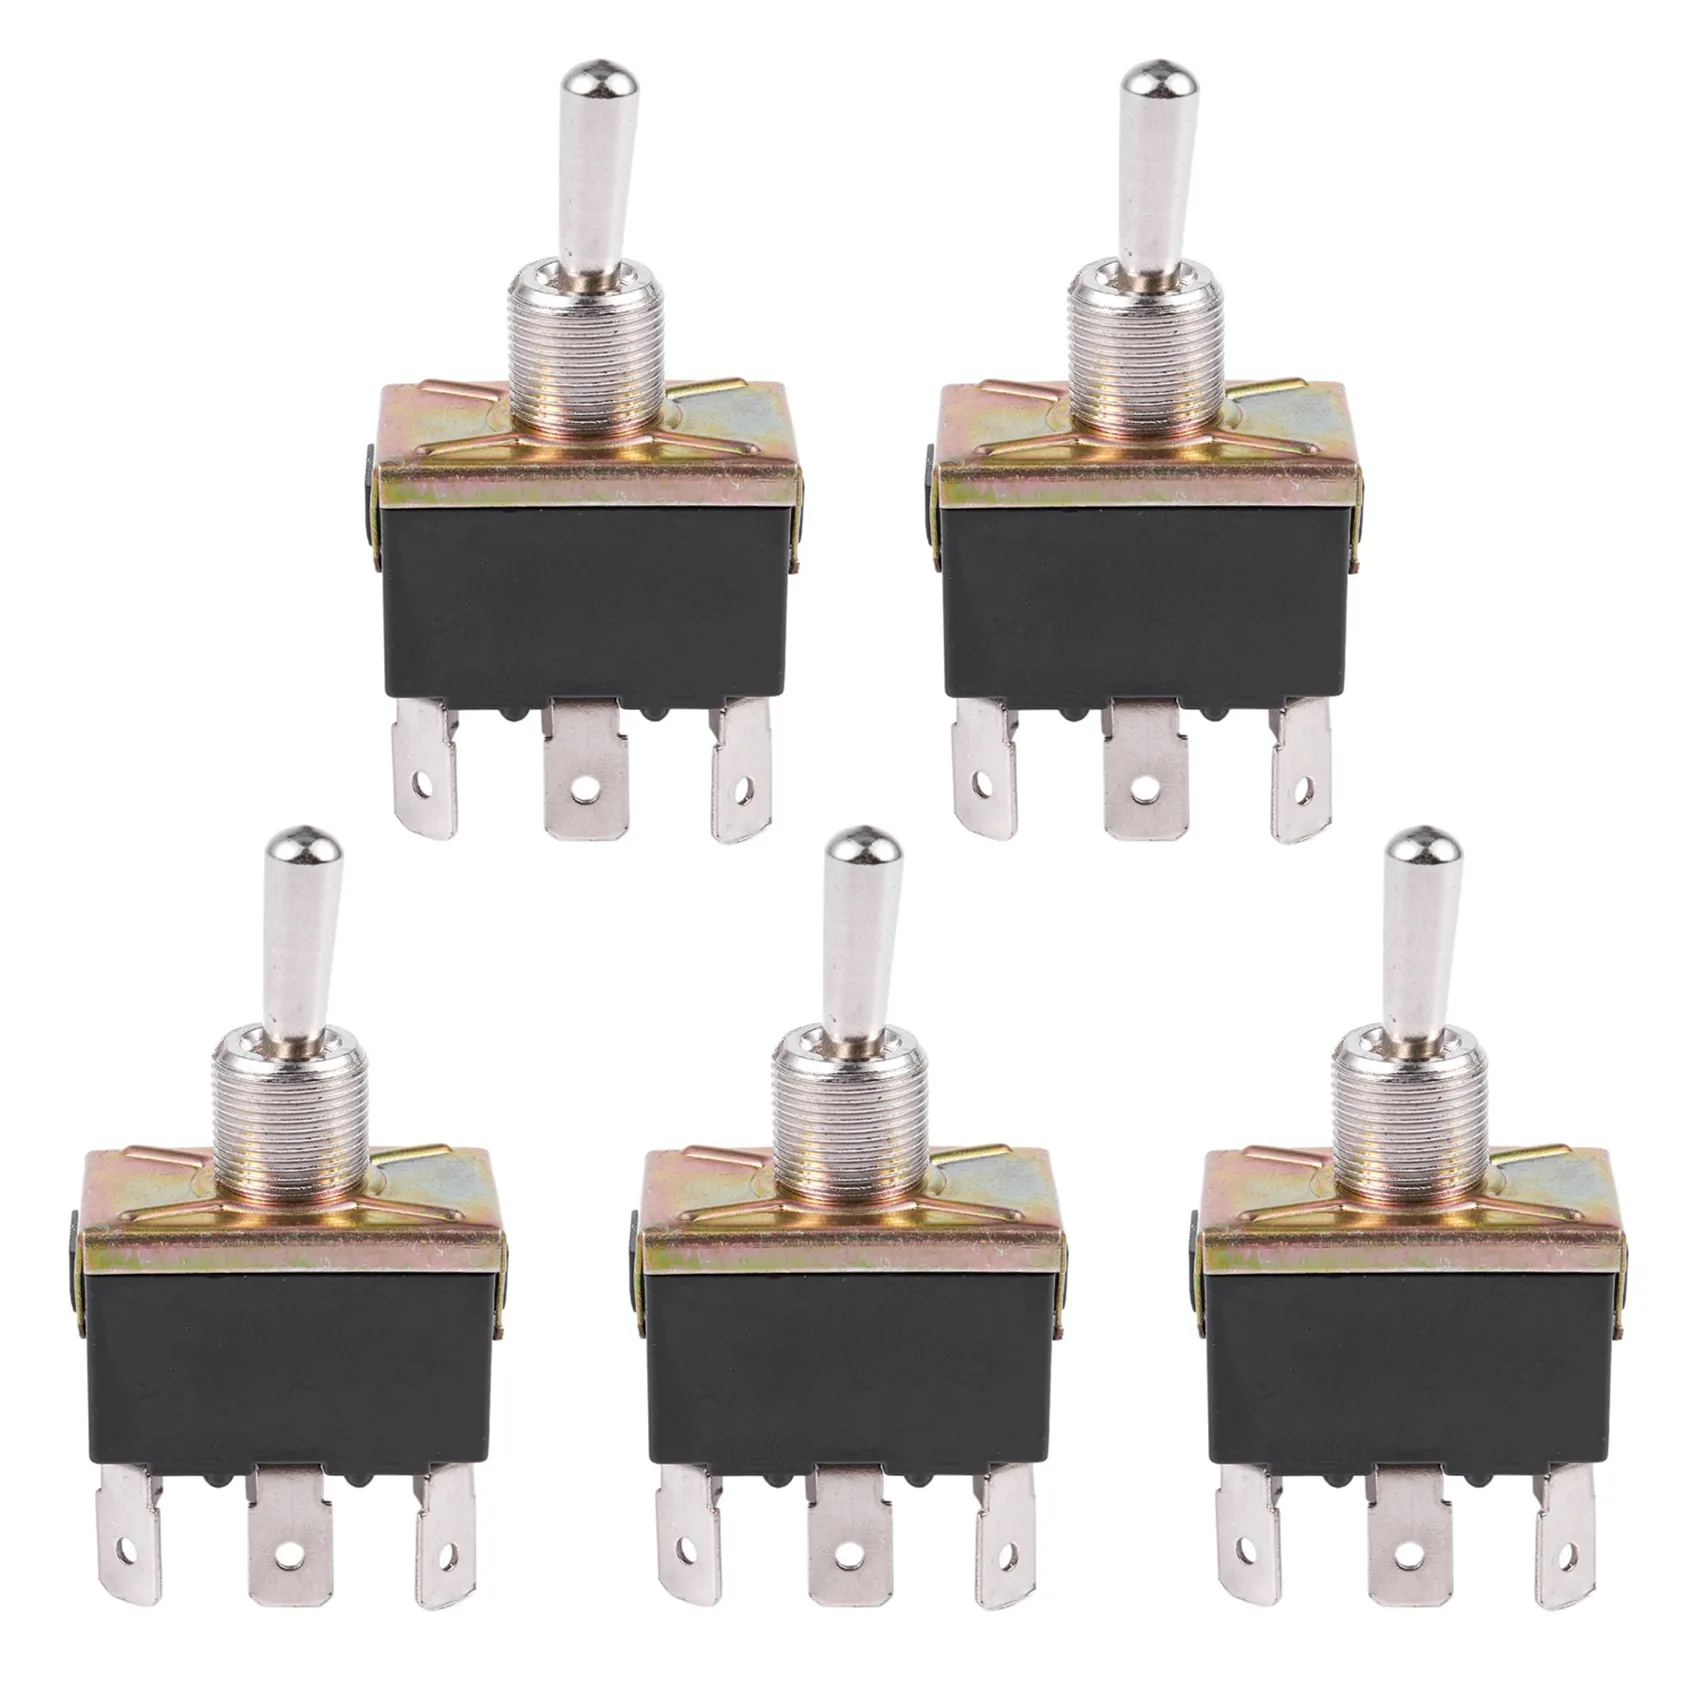 

5X AC 250V/10A 125V/15A DPDT 3 Position ON/OFF/ON 6 Pins Toggle Switch Black+Silver